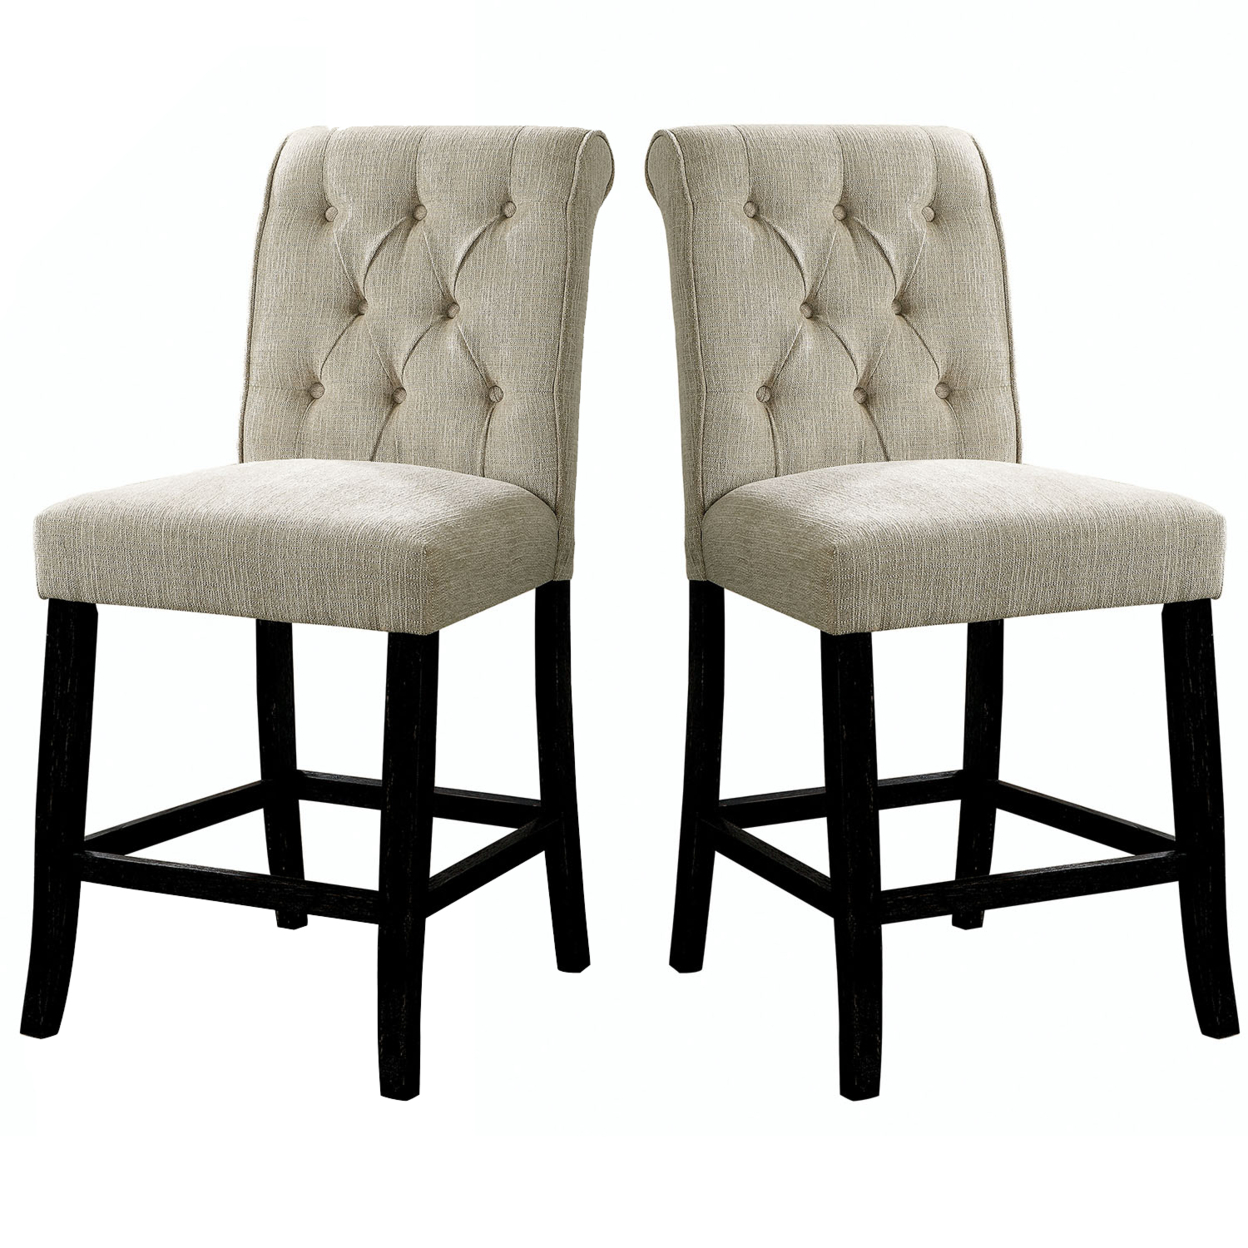 Wooden Fabric Upholstered Counter Height Chair, Ivory And Black, Pack Of Two- Saltoro Sherpi